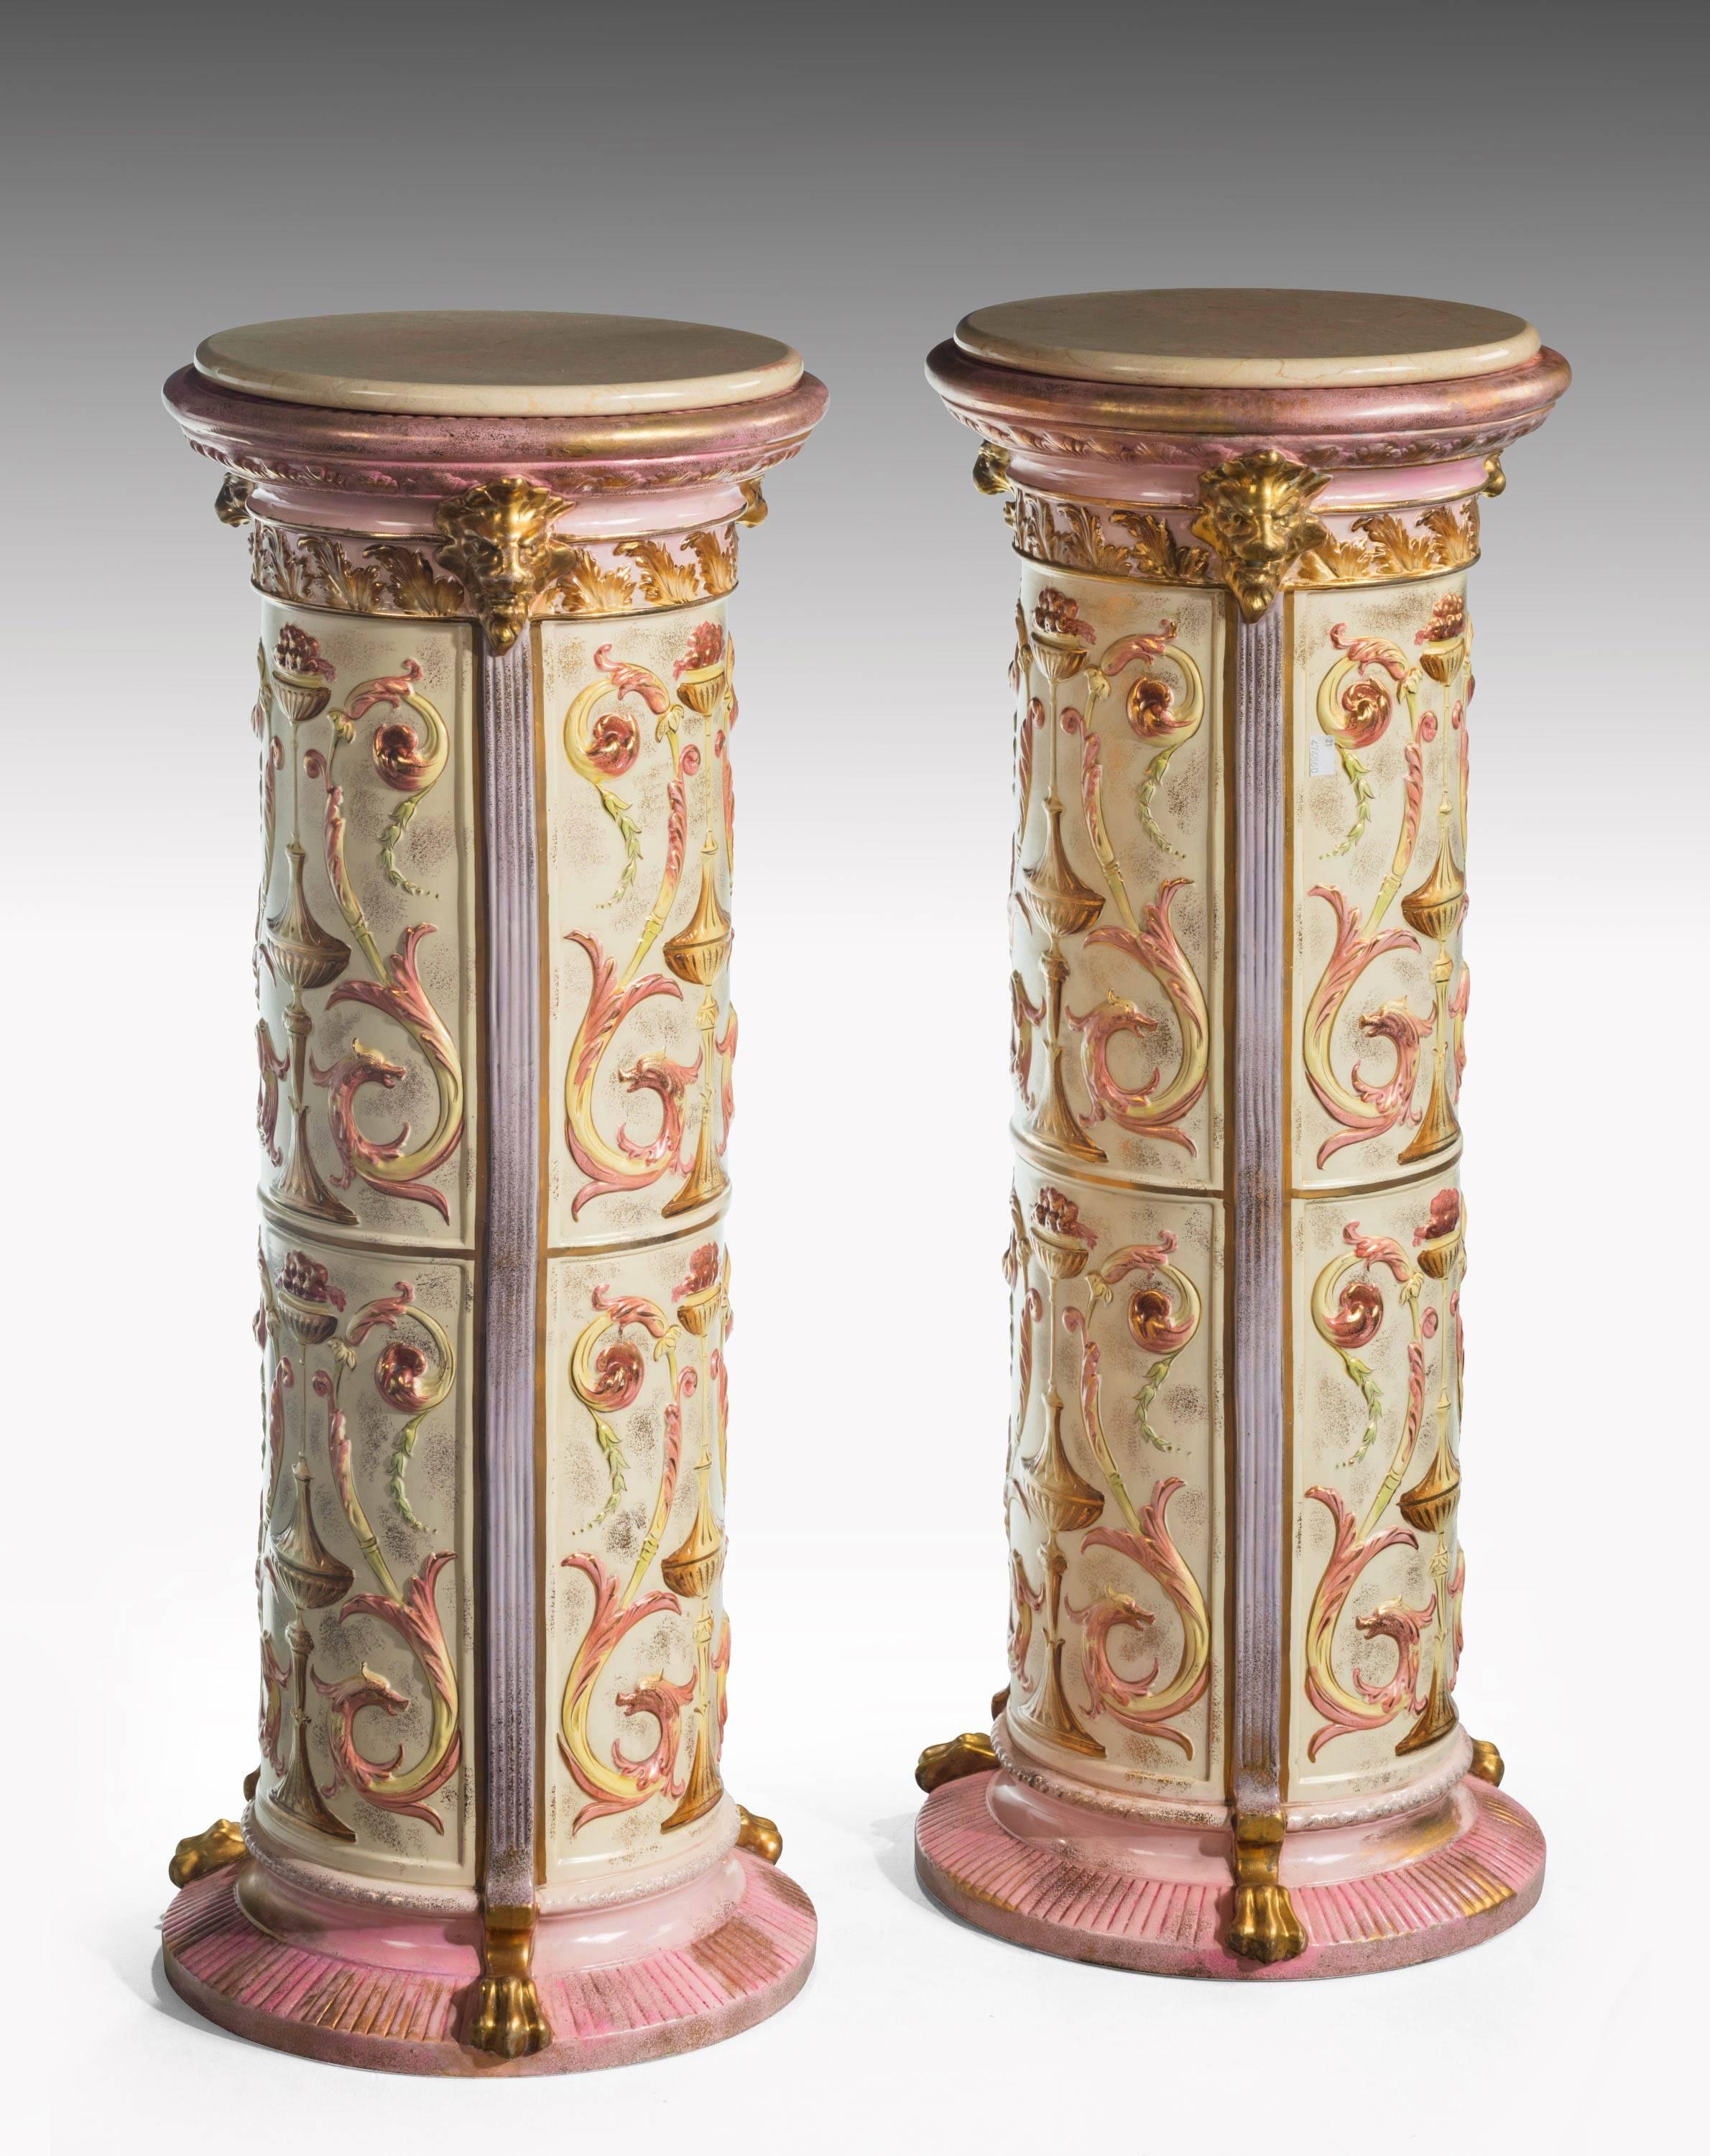 A finely designed pair of pottery columns with elaborate scroll and neoclassic decoration. Replaced marble tops. 

N.